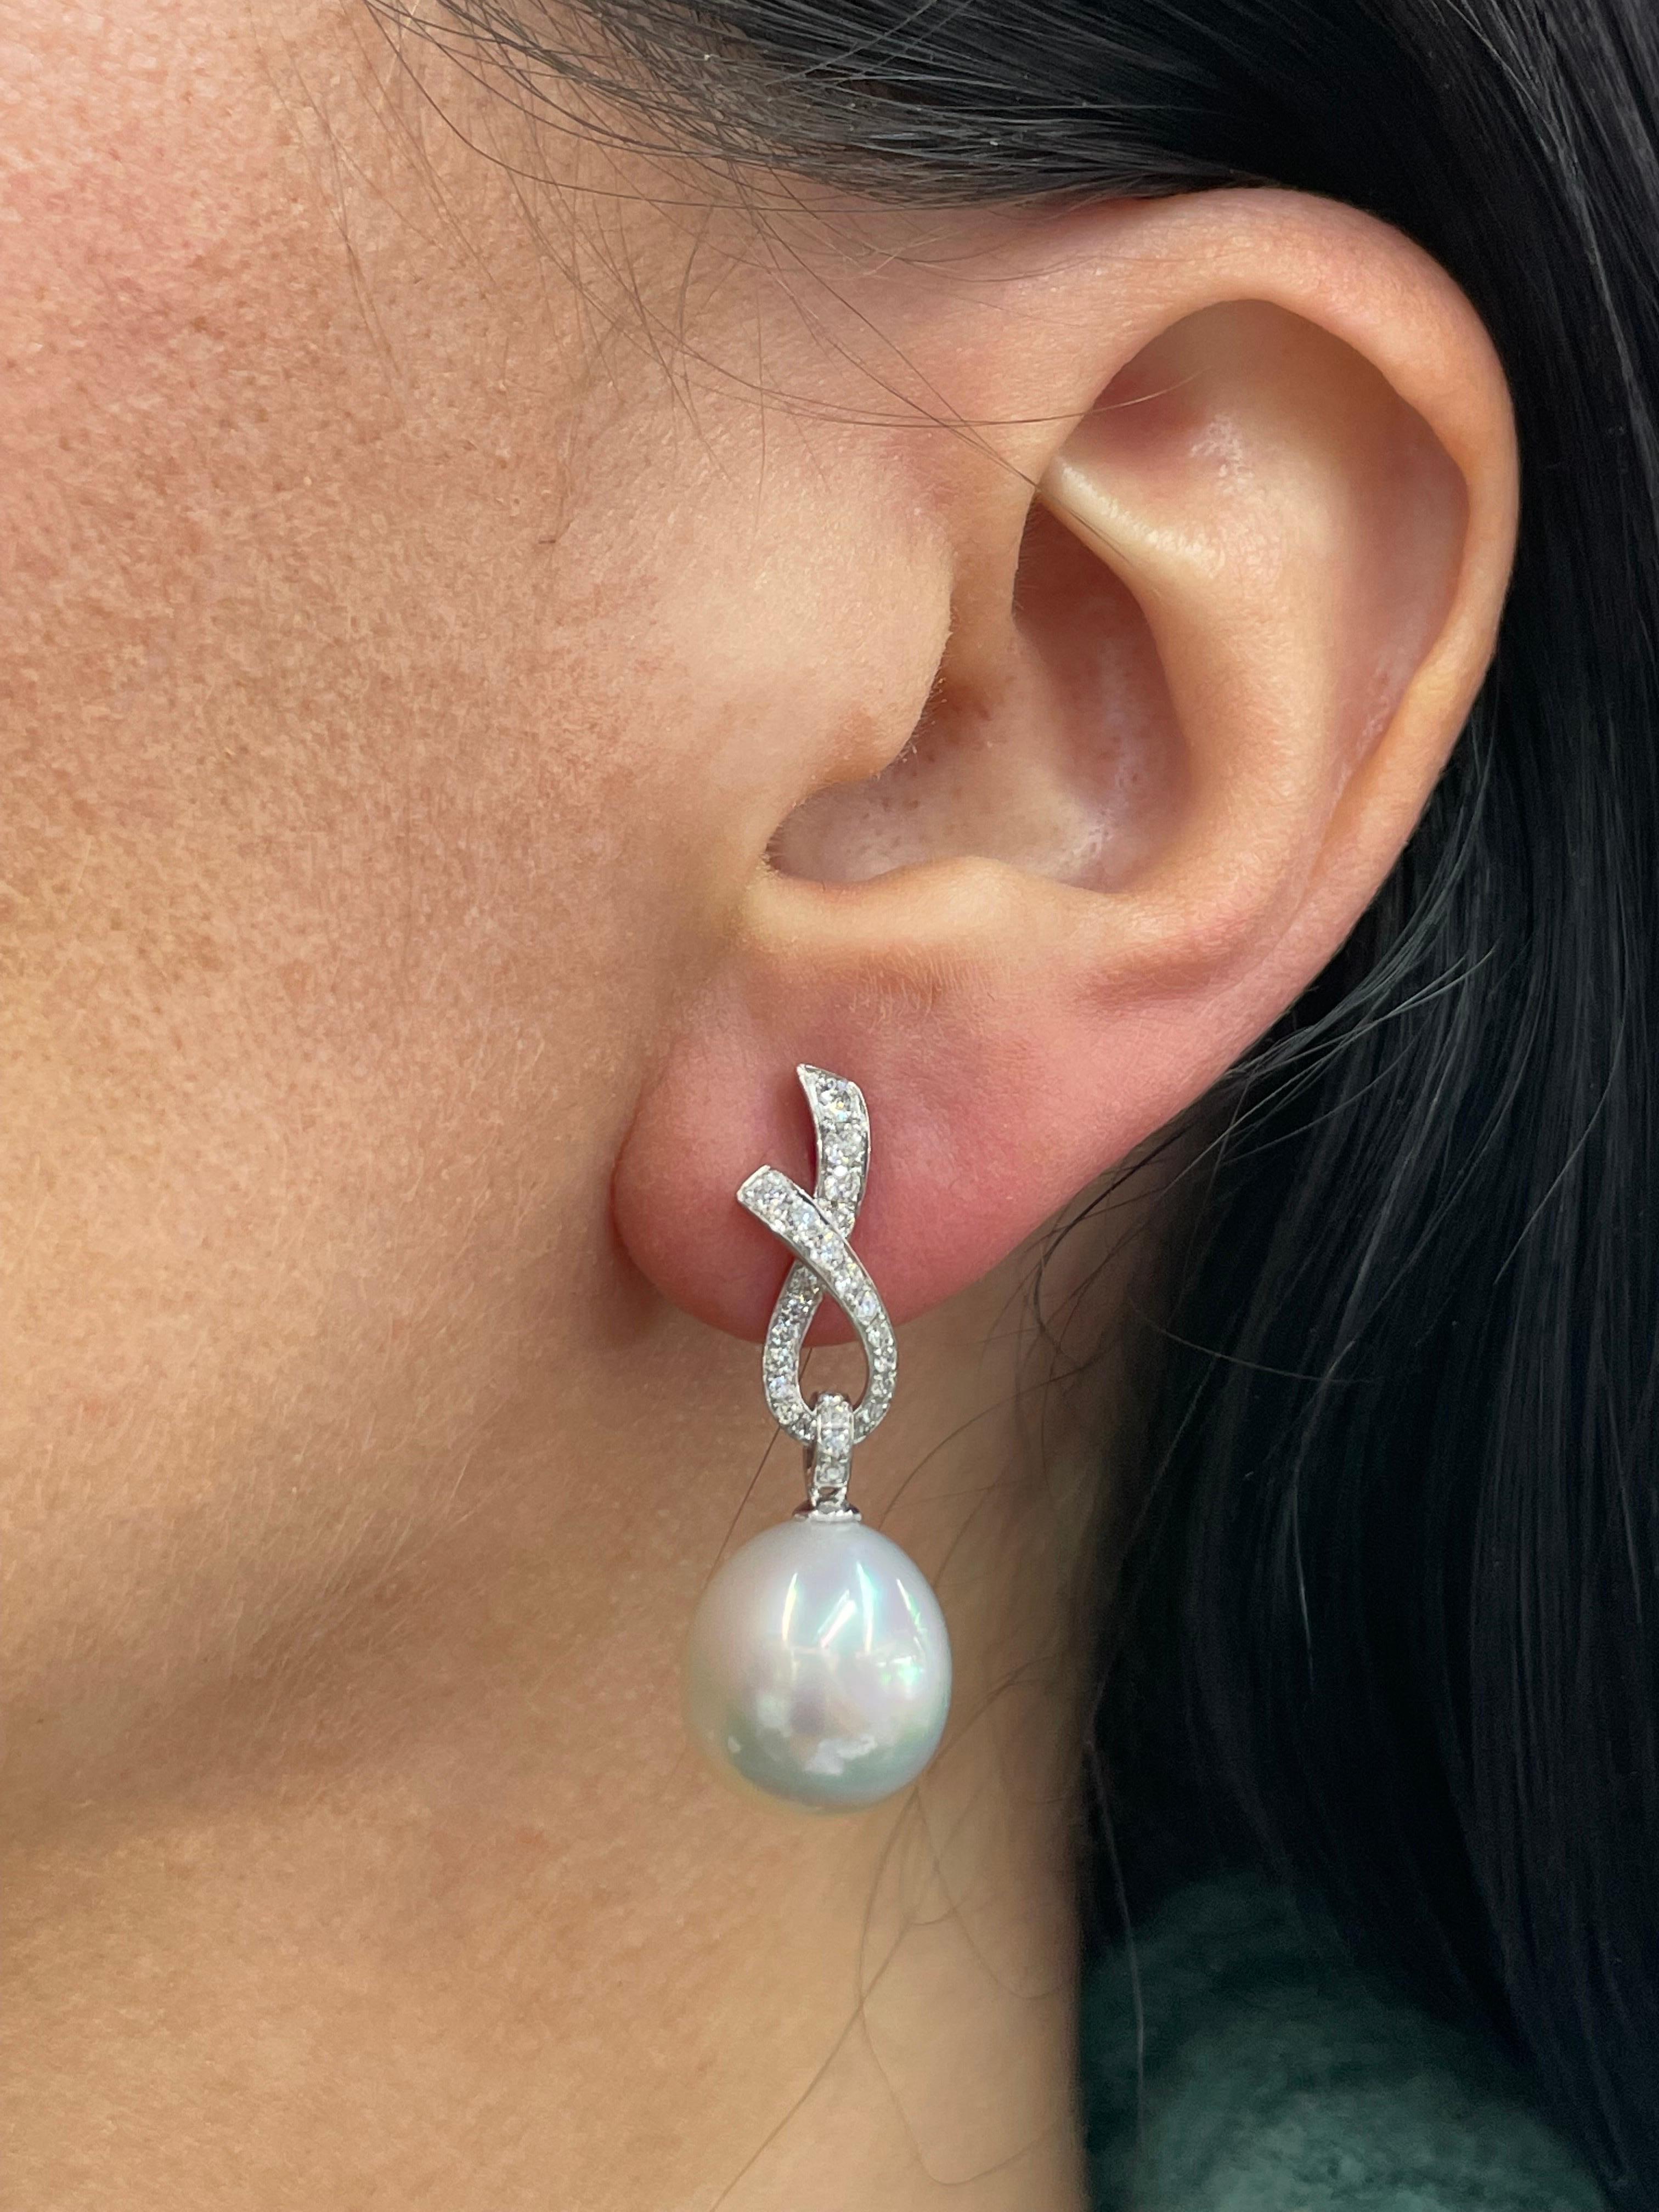 18 Karat White Gold drop earrings featuring a diamond ribbon motif containing 52 diamonds weighing 0.57 carats and two South Sea Pearls measuring 12-13 MM.
Color G-H
Clarity SI
Customize in different gold color & pearls. 